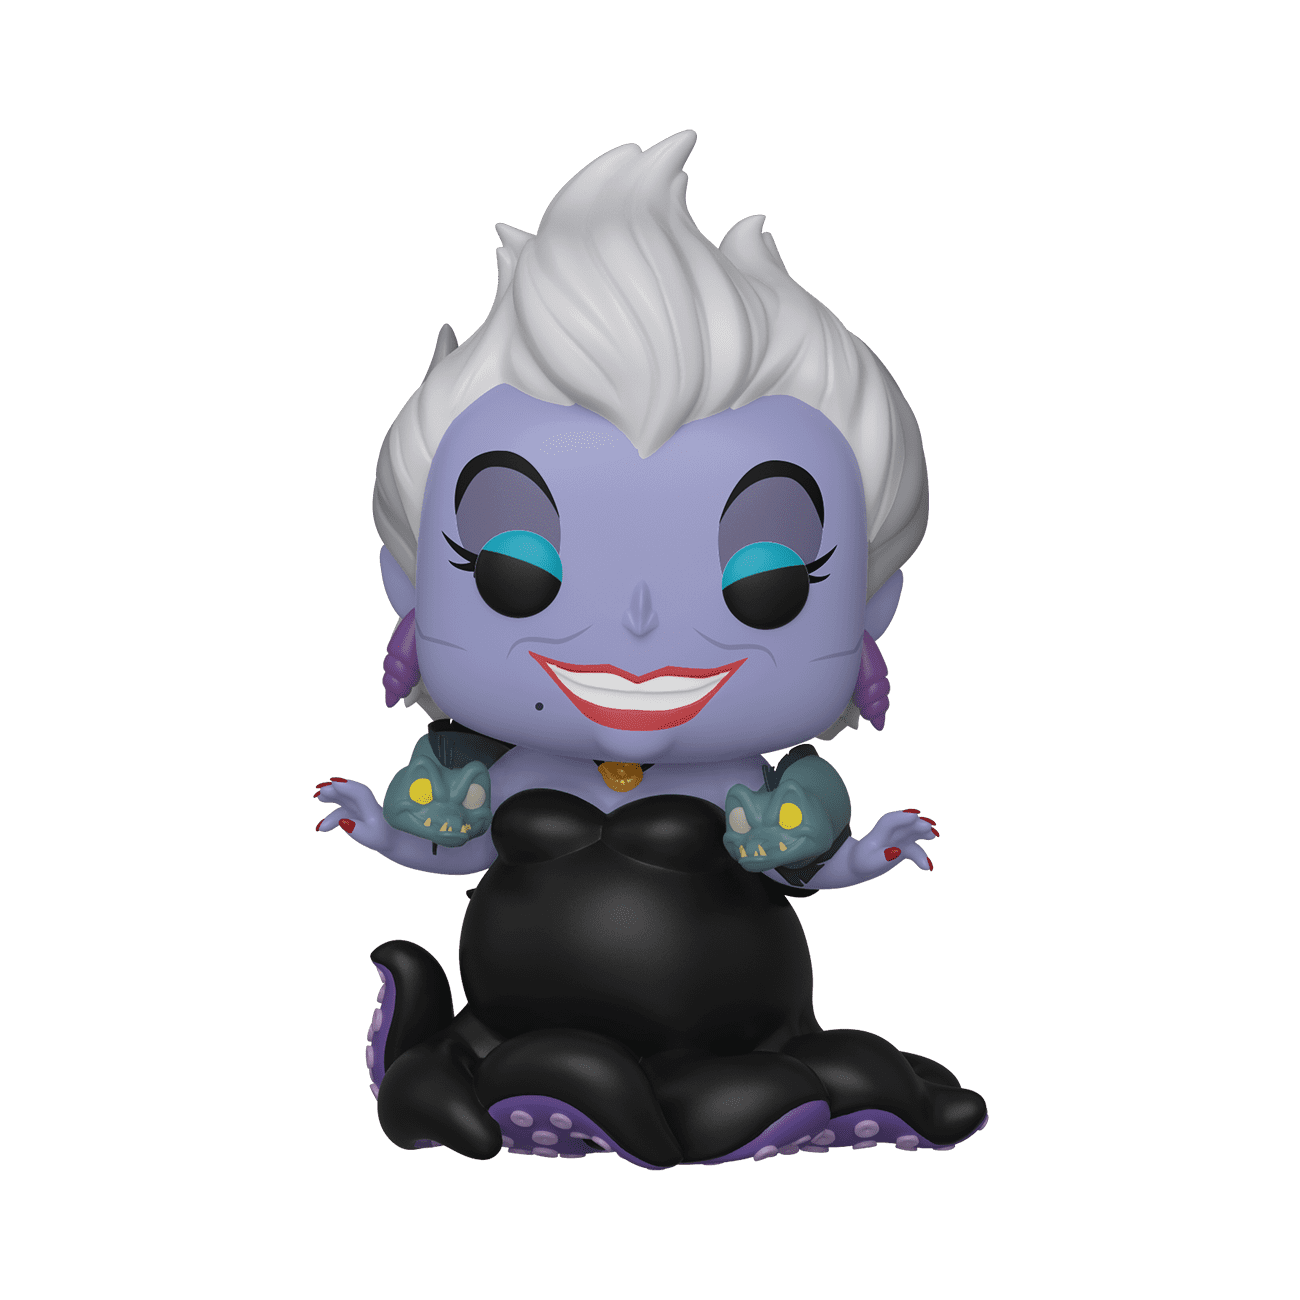 Ursula 5 Star 4" Highly Collectible Vinyl Figure Gift The Little Mermaid 